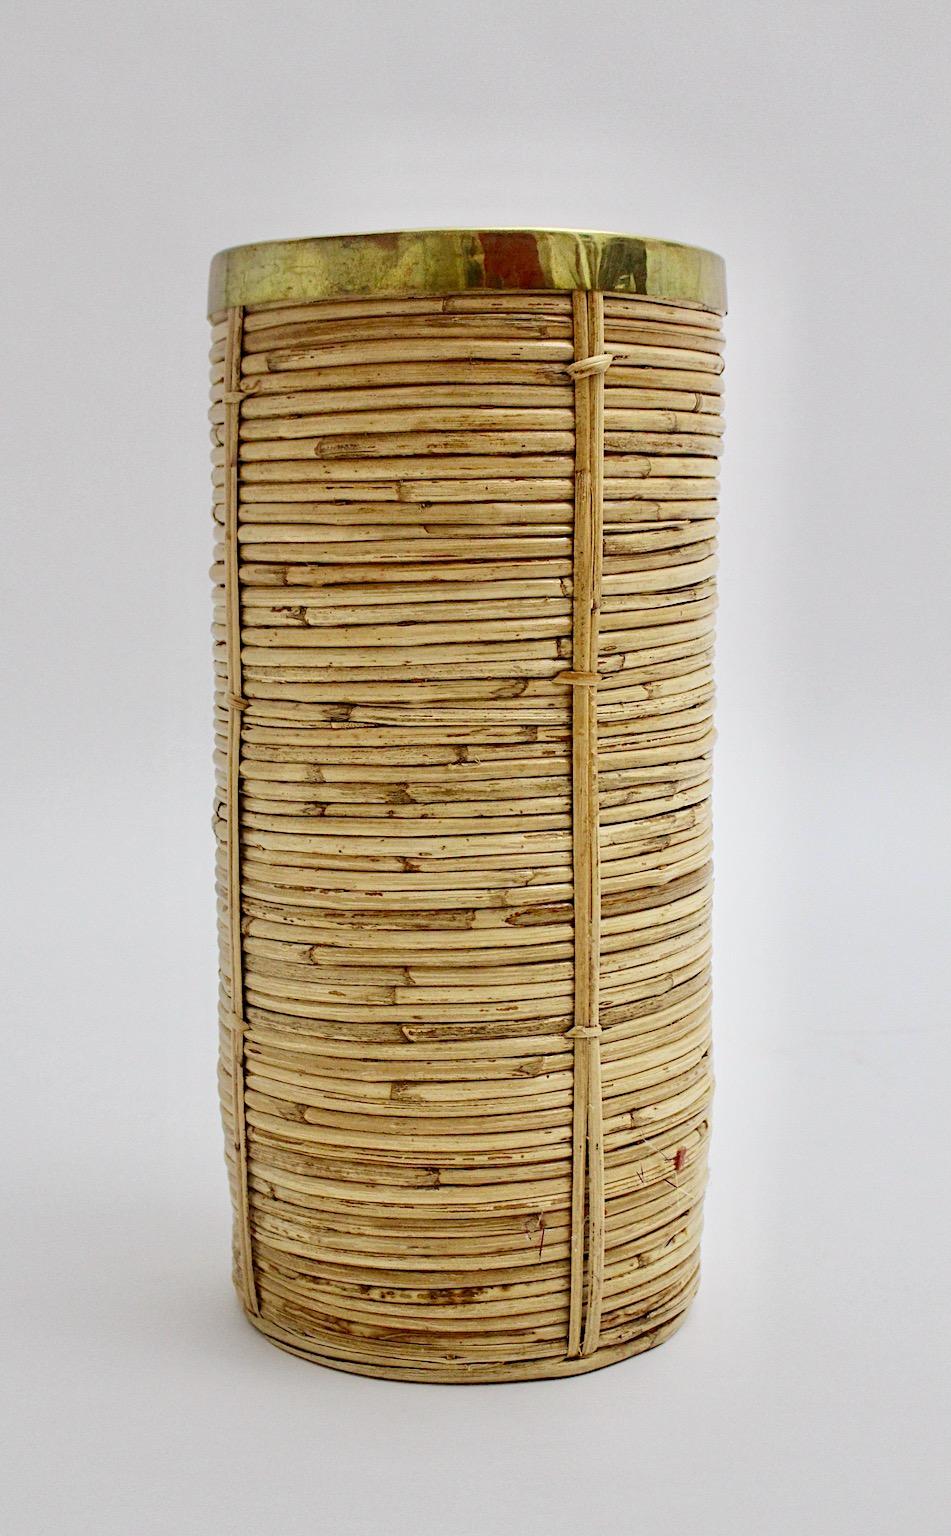 Hollywood regency style organic paper basket or cane holder from rattan and brass  1970s Italy.
An amazing paper basket from rattan work with a patinated brass trim could be a natural beauty in your entry room, anteroom or living space.
The beauty